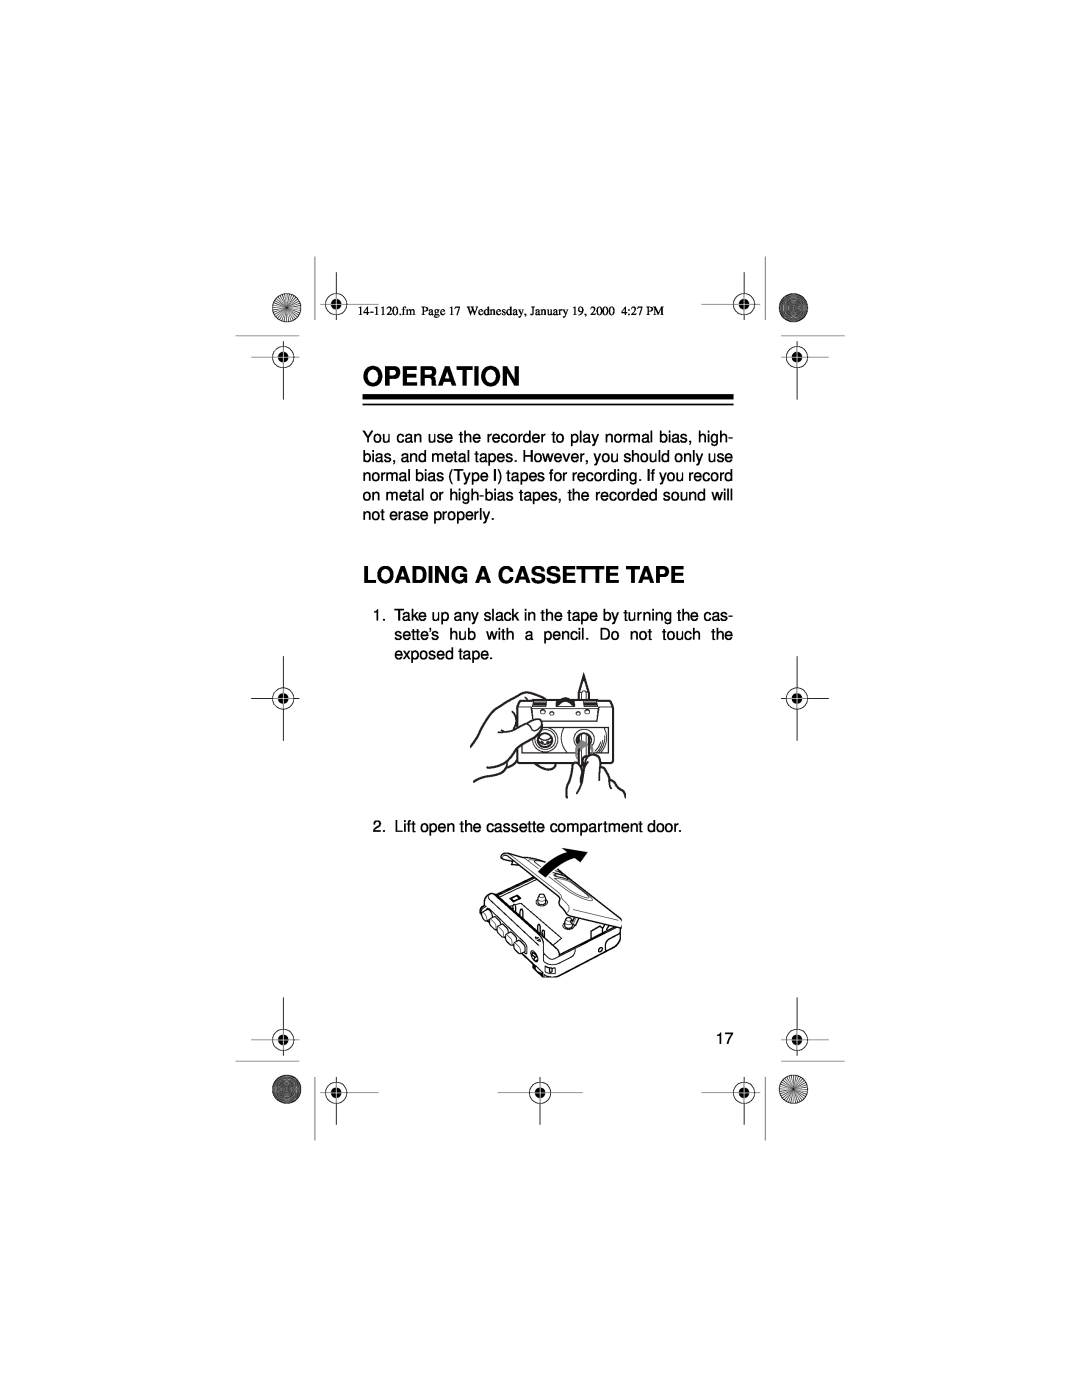 Panasonic CTR-114 owner manual Operation, Loading A Cassette Tape 